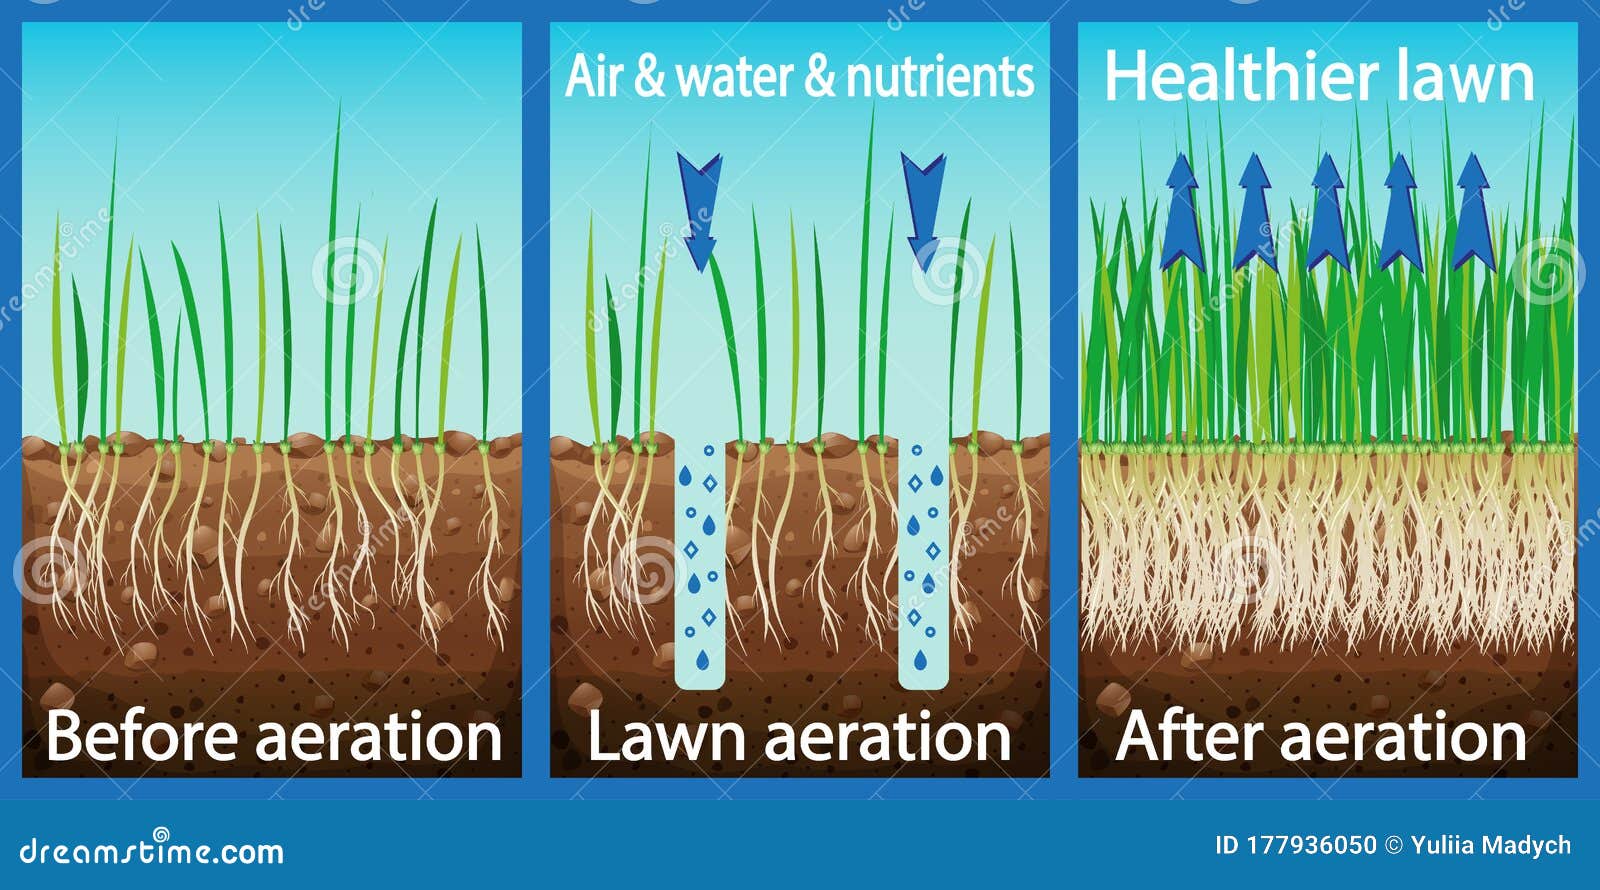 aeration of the lawn. enrichment with oxygen water and nutrients to improve lawn growth. before and after aeration: gardening,